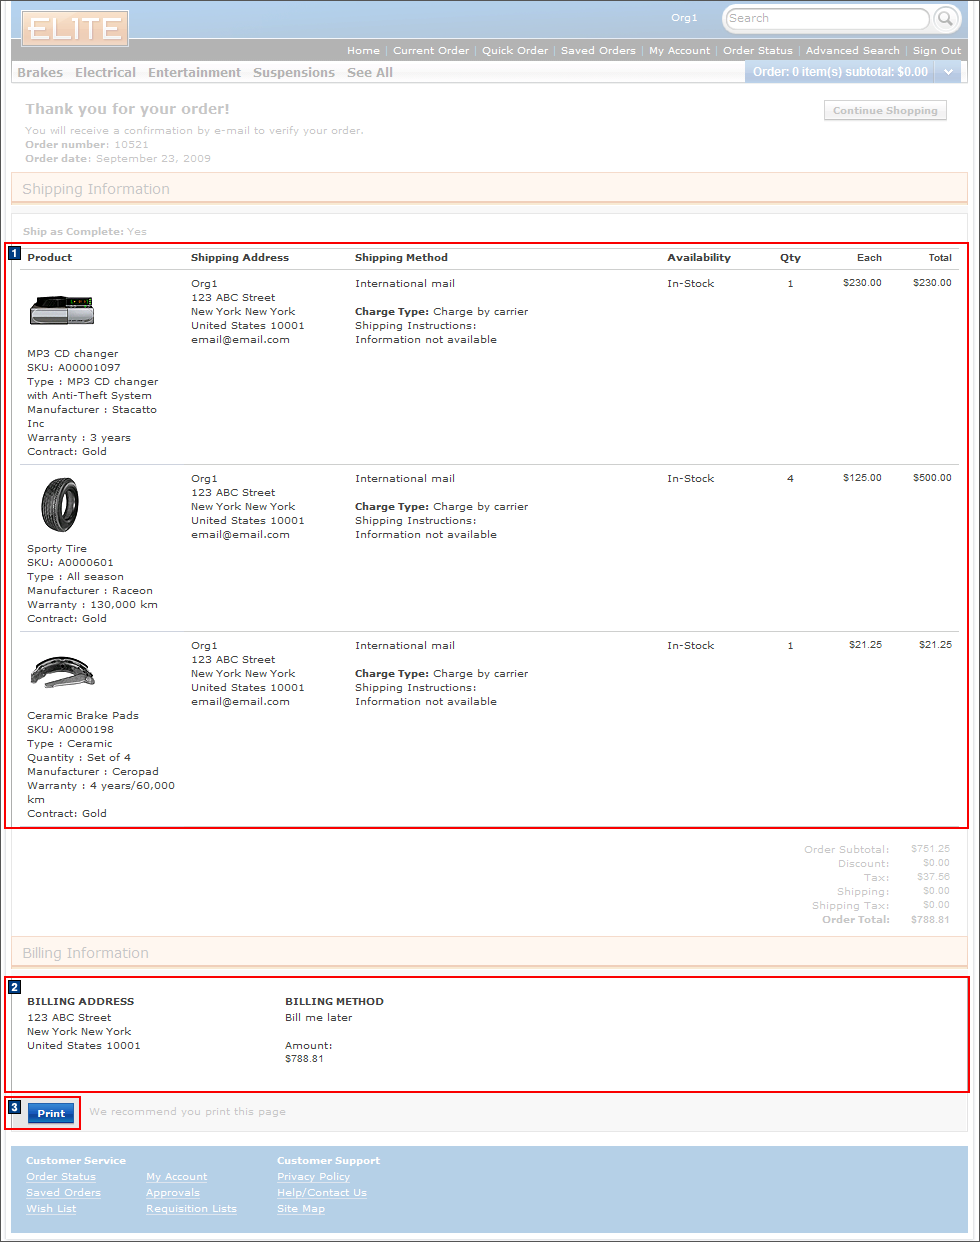 Full size image of Checkout confirmation: Multiple shipping and billing addresses